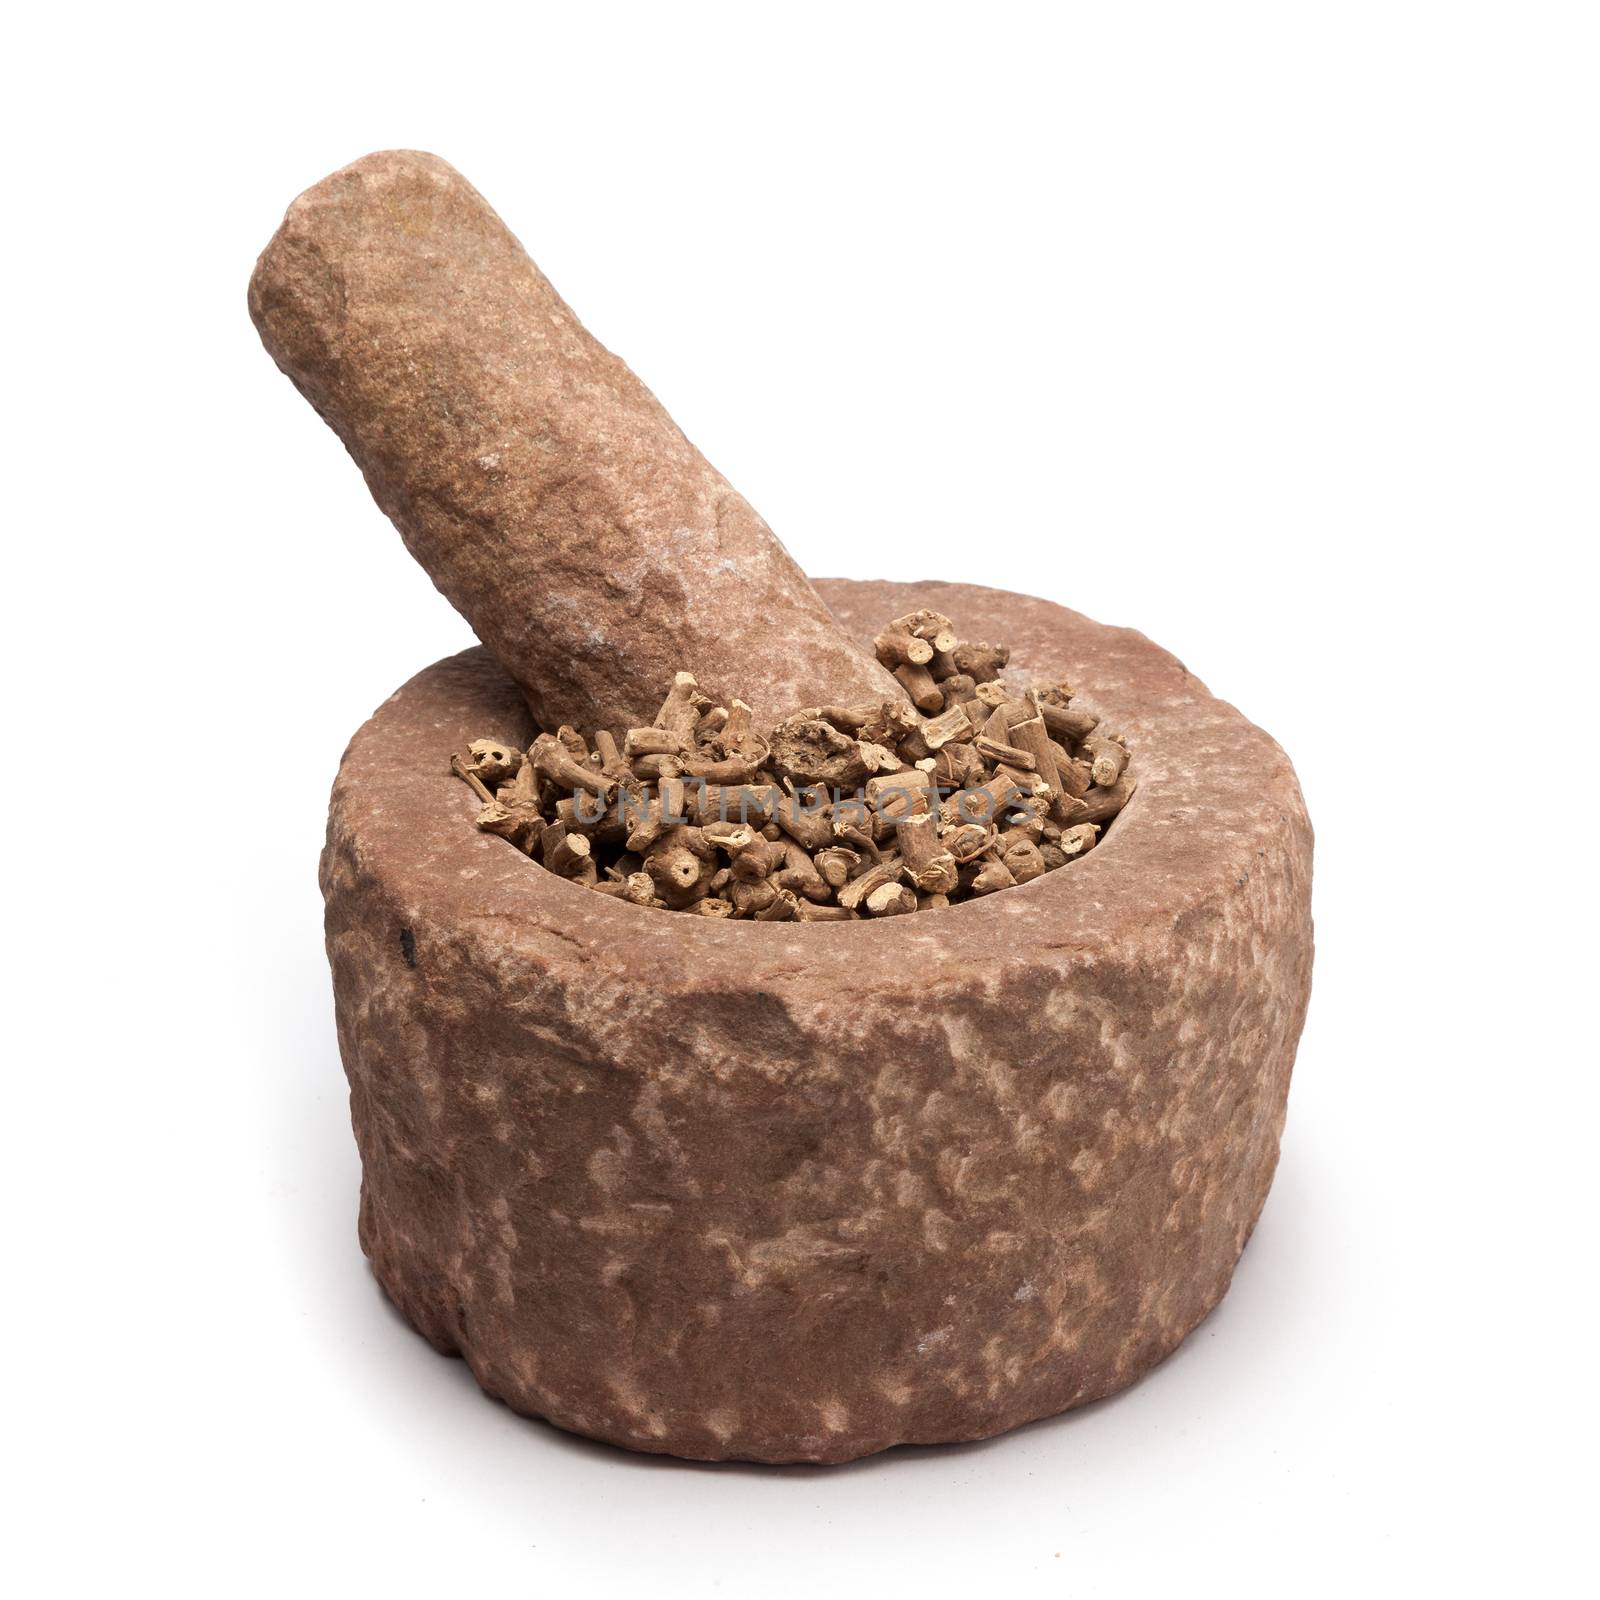 Organic Ganthoda or Long pepper Roots (Piper longum) in mortar with pestle, isolated on white background.